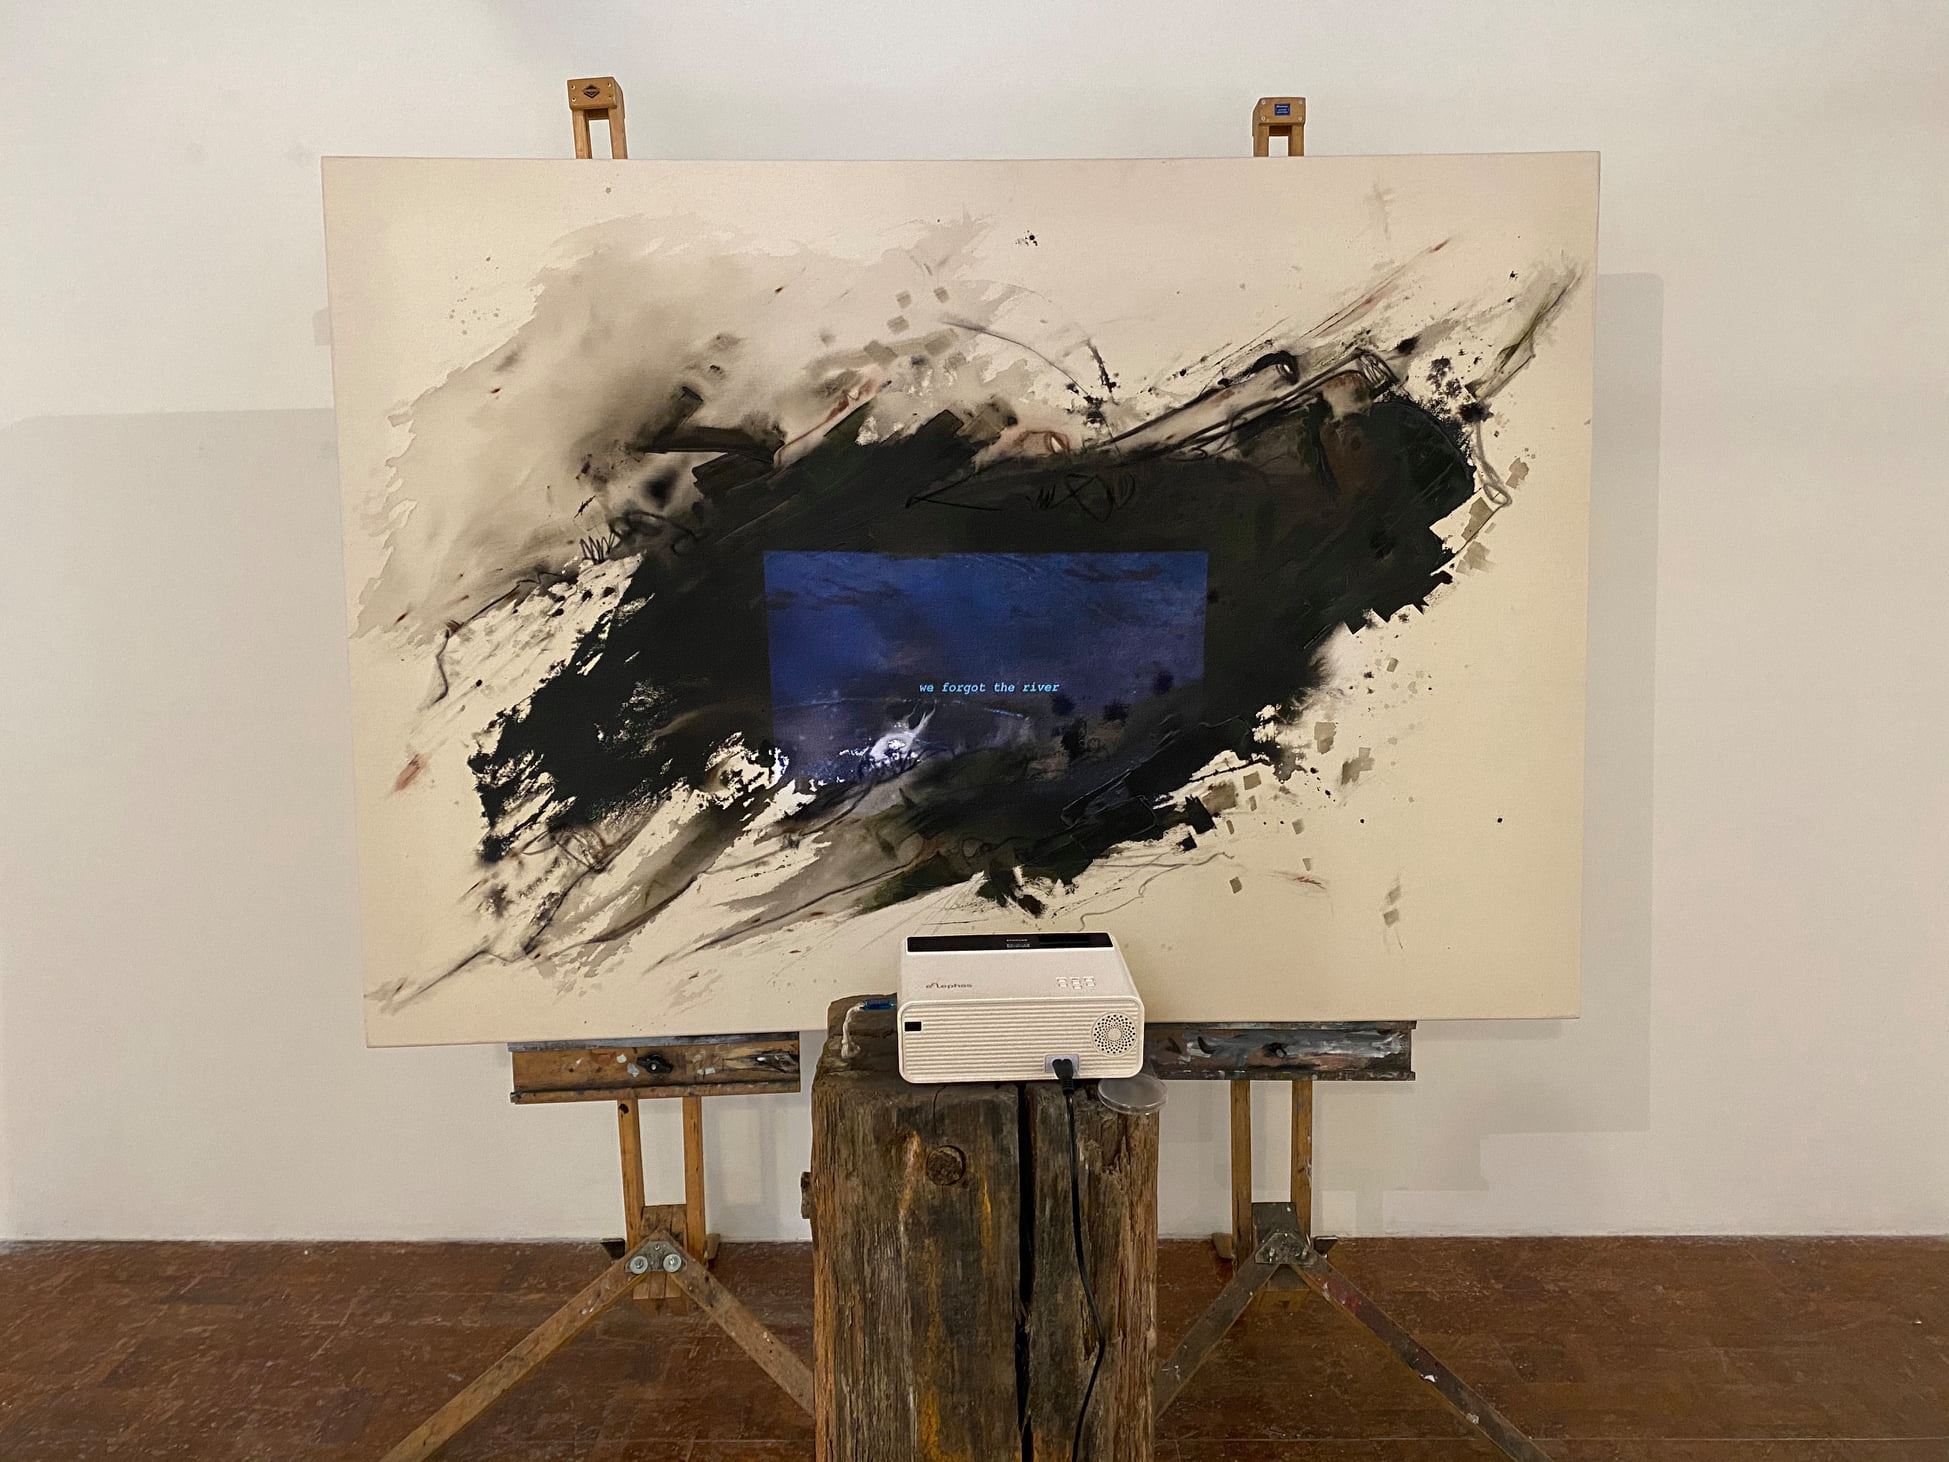 Rachel Jutková, The Story of Many Rivers (Installation view). Video projection, acrylic paint, washed wood, cashmere and wool on canvas, 2020.